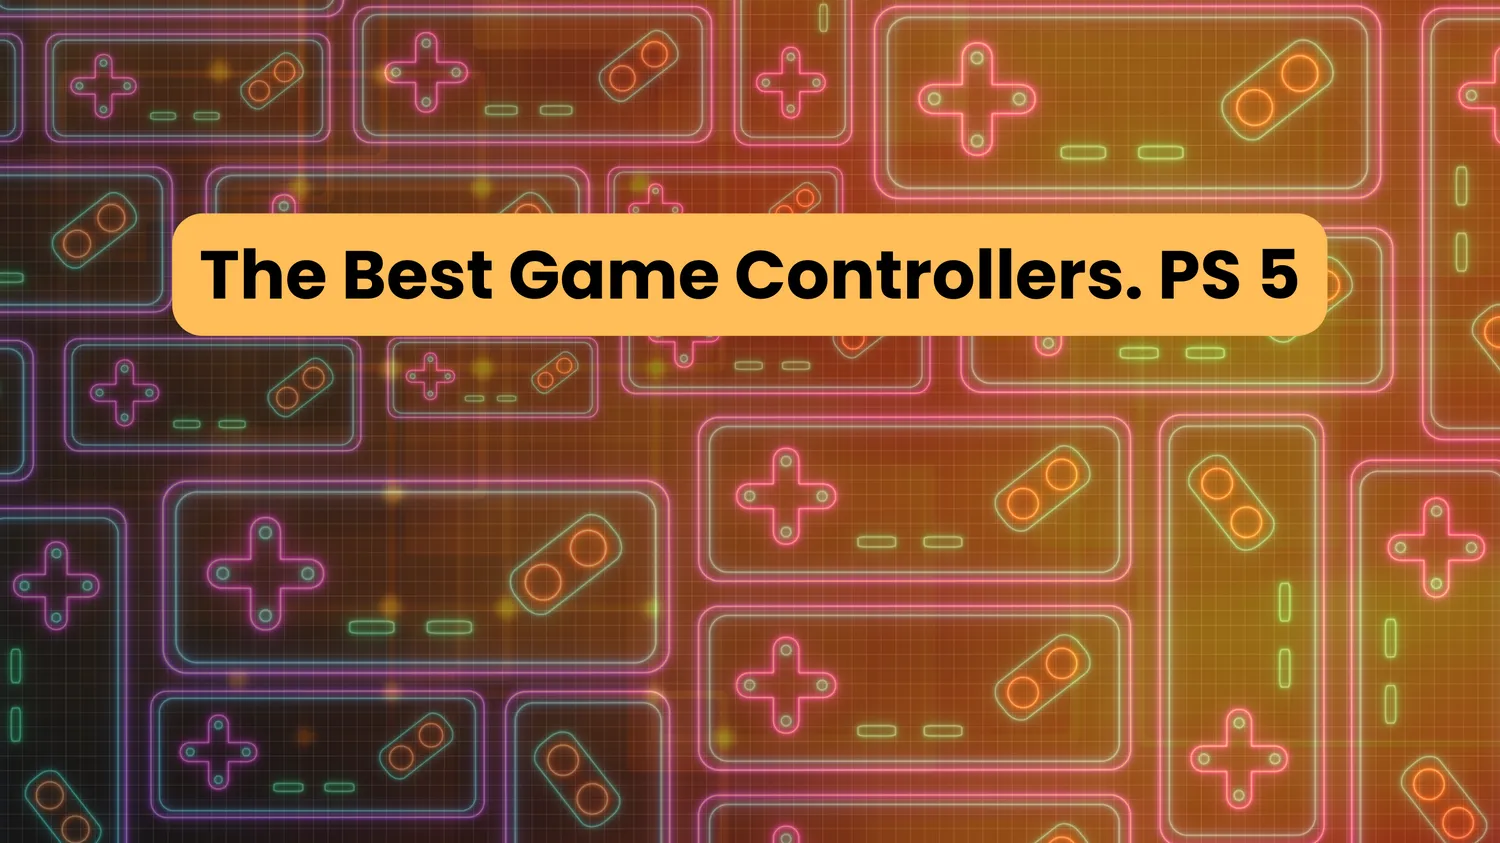 The best game controllers for PS 5 image